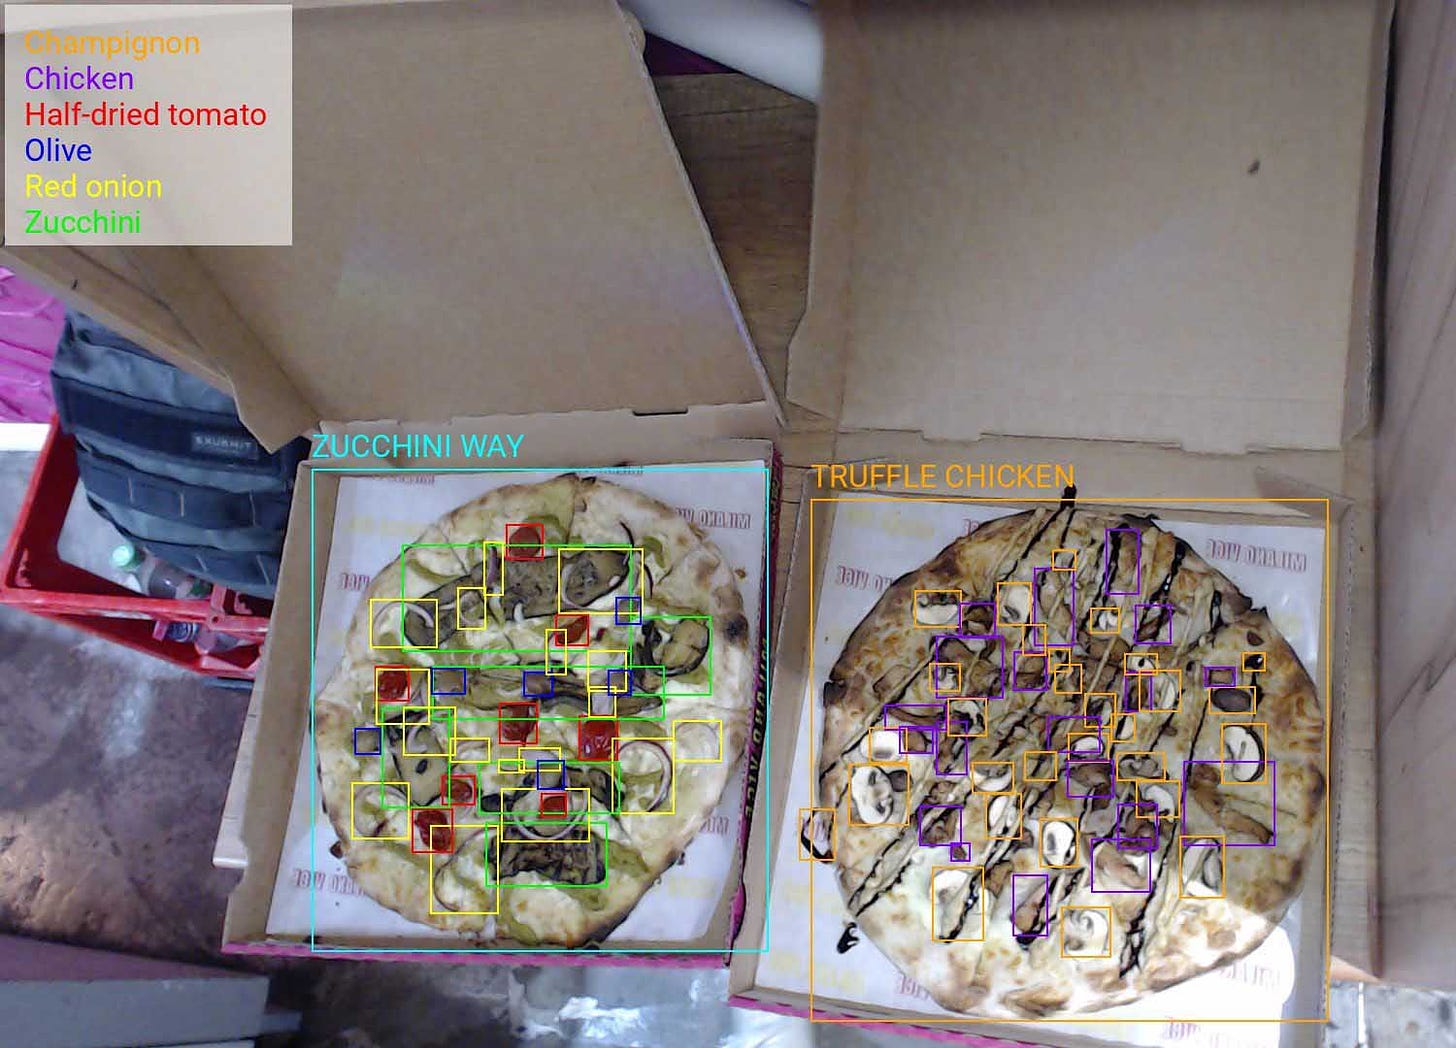 A picture of two pizzas with machine learning bounding boxes around the pizzas and ingredients